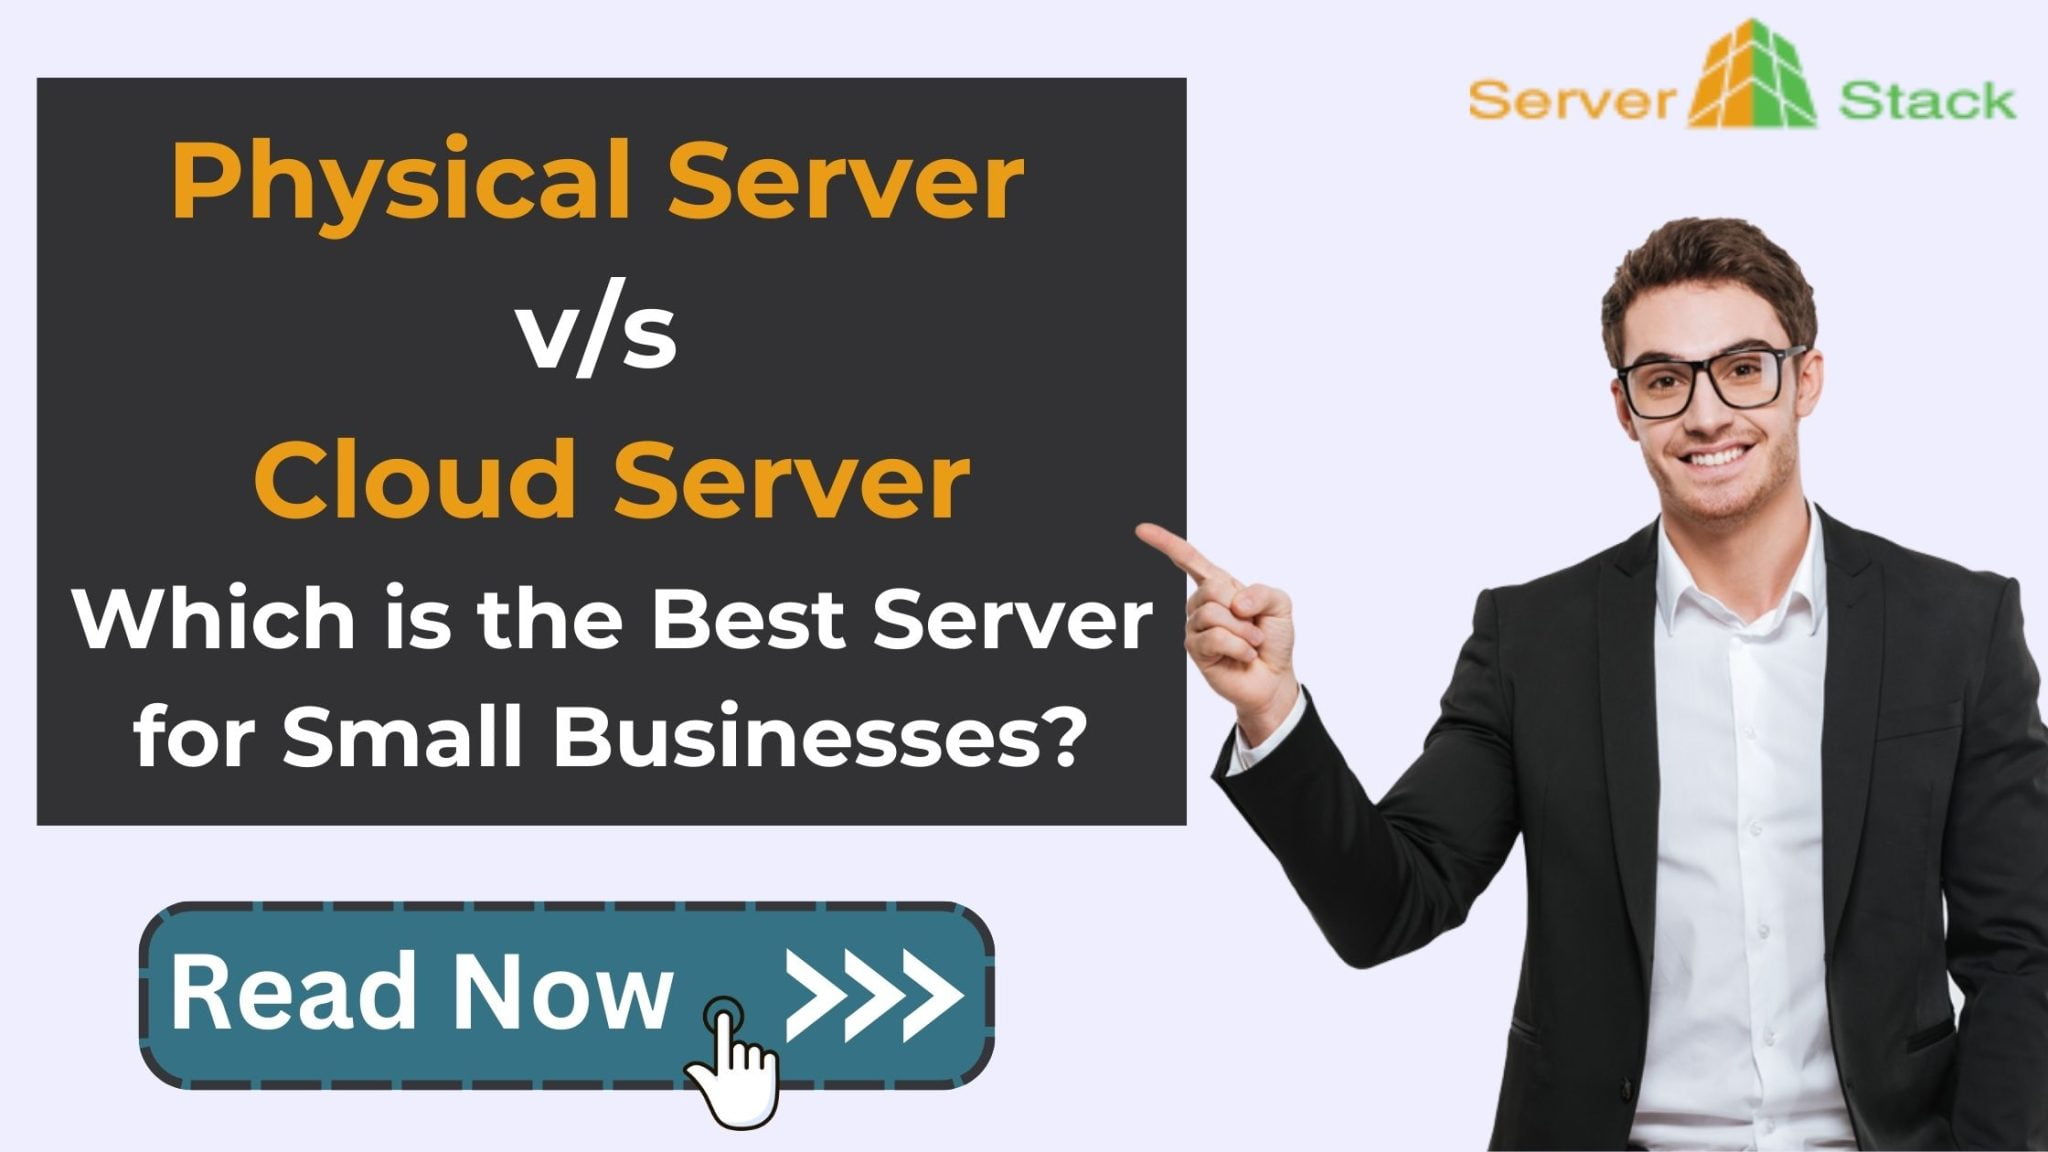 Physical Server v/s Cloud Server: Which is the Best Server for Small Businesses?